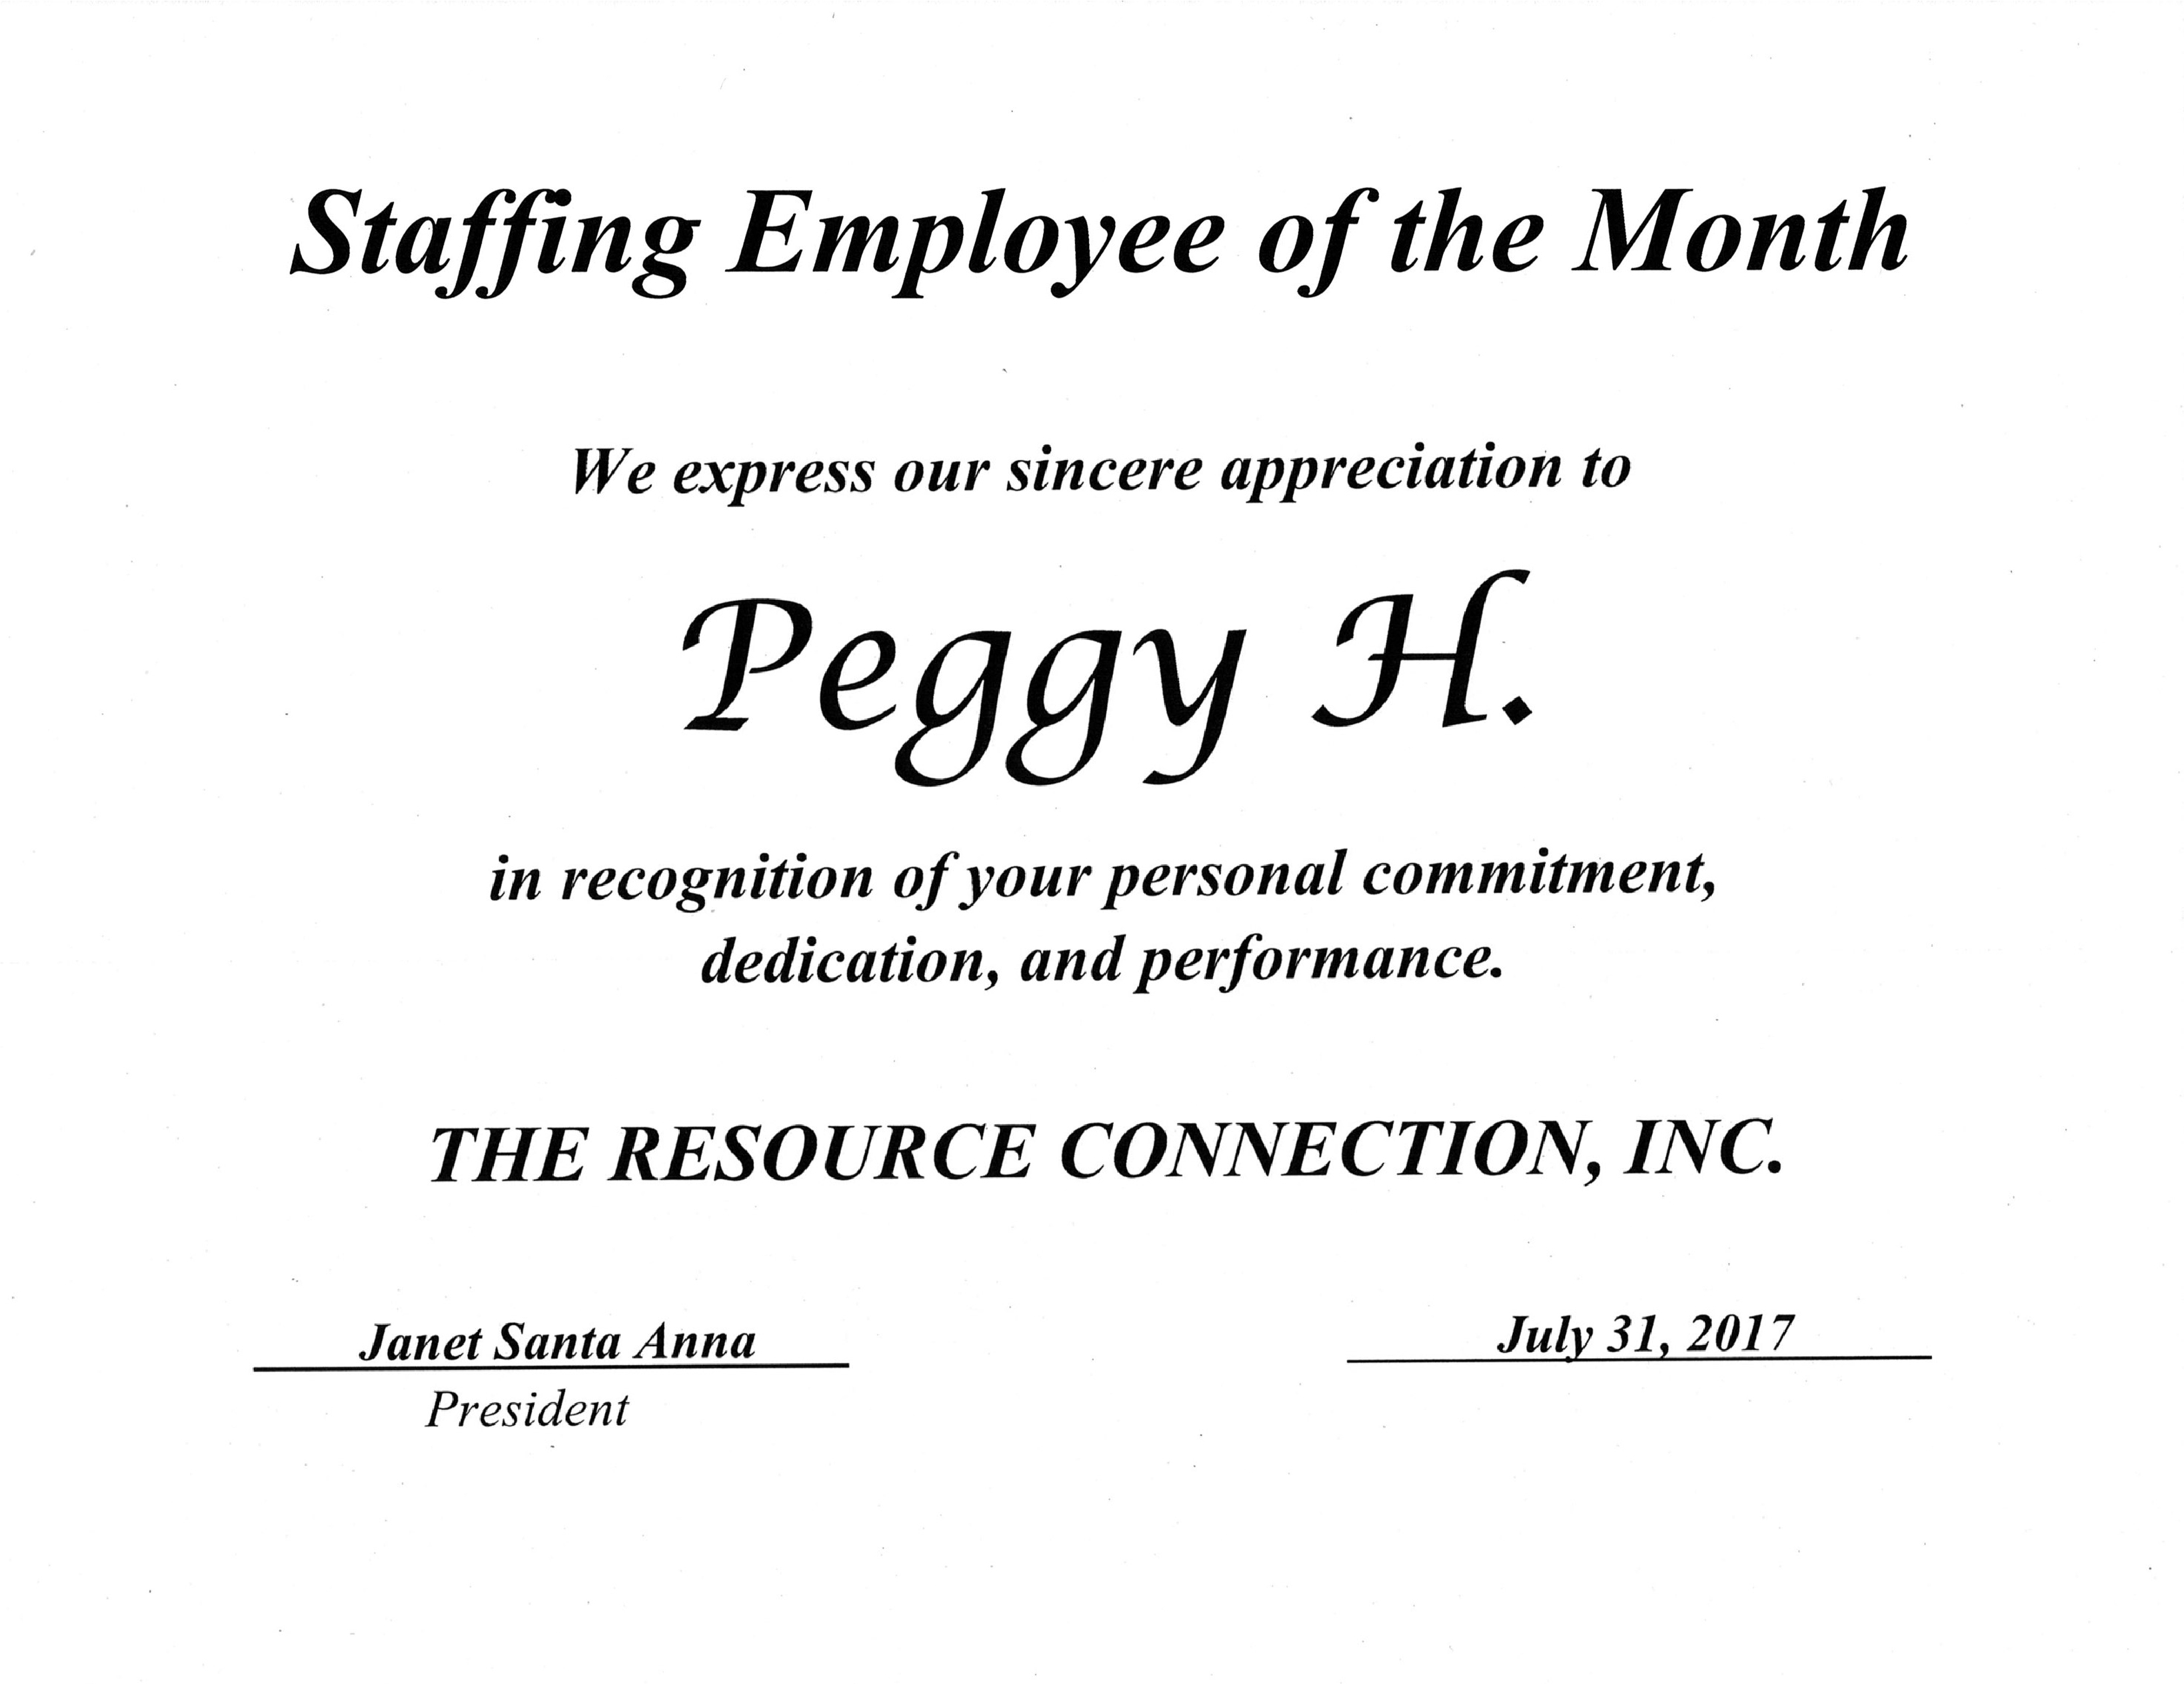 Peggy H. – June 2017 – Motivated and Eager